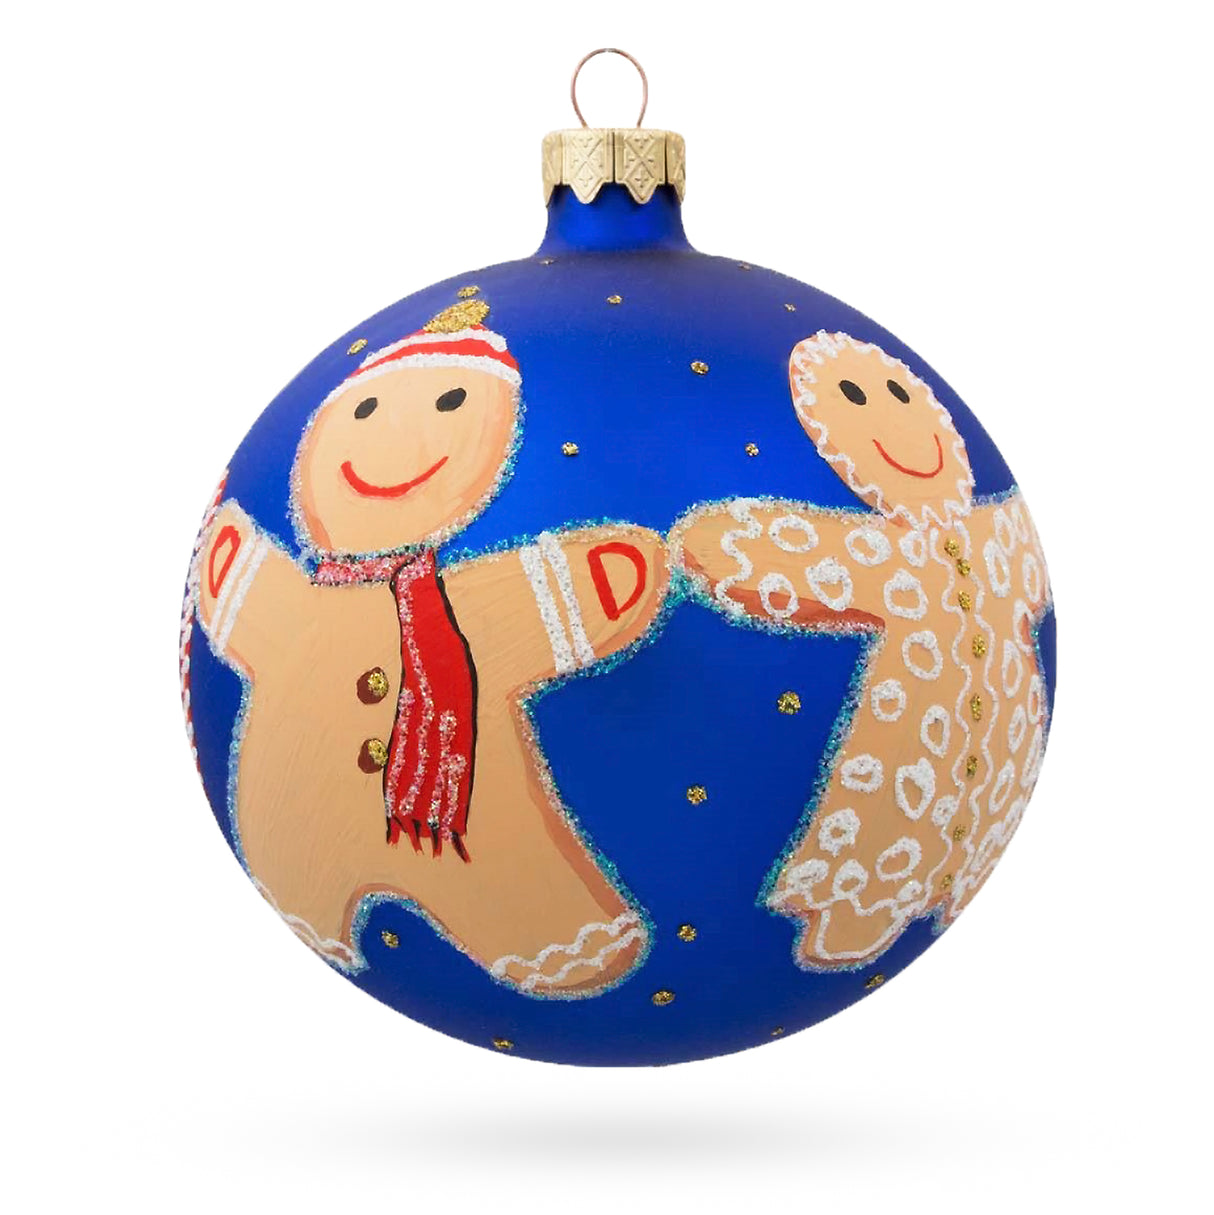 Glass Delightful Gingerbread Family with Candy Cane Blown Glass Ball Christmas Ornament 4 Inches in Blue color Round